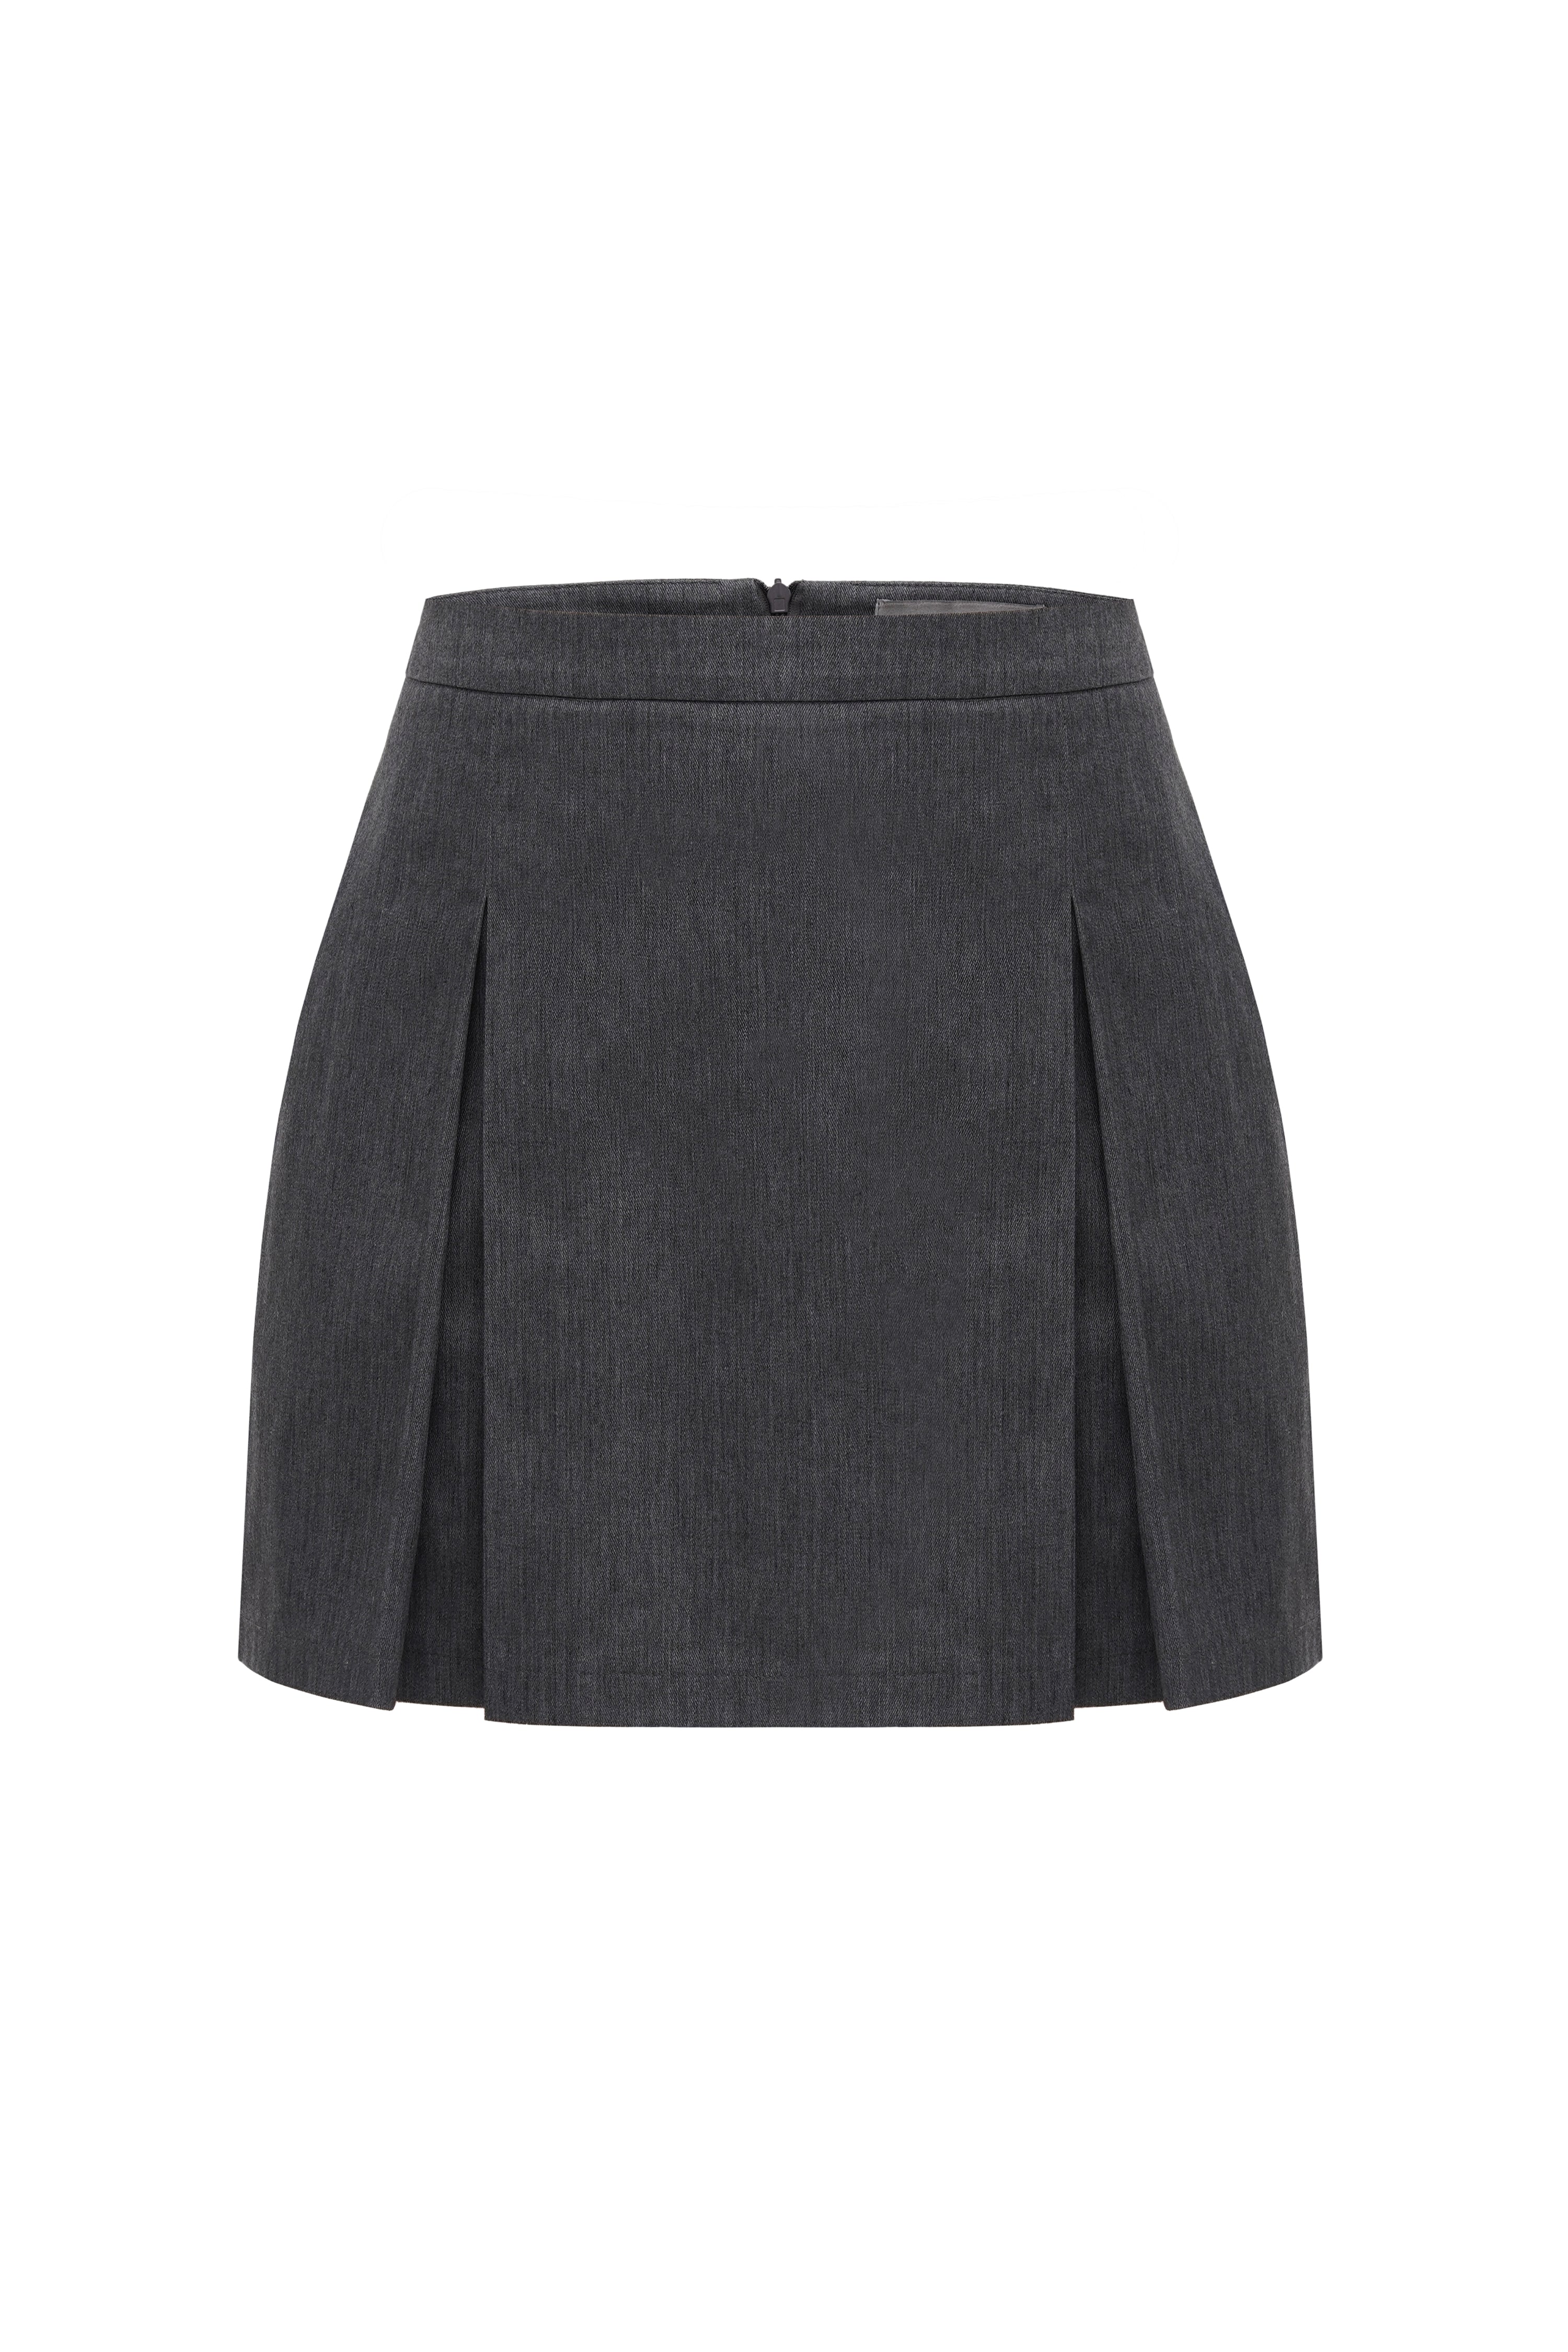 HER CIPHER mini skirt pleated in color Graffite